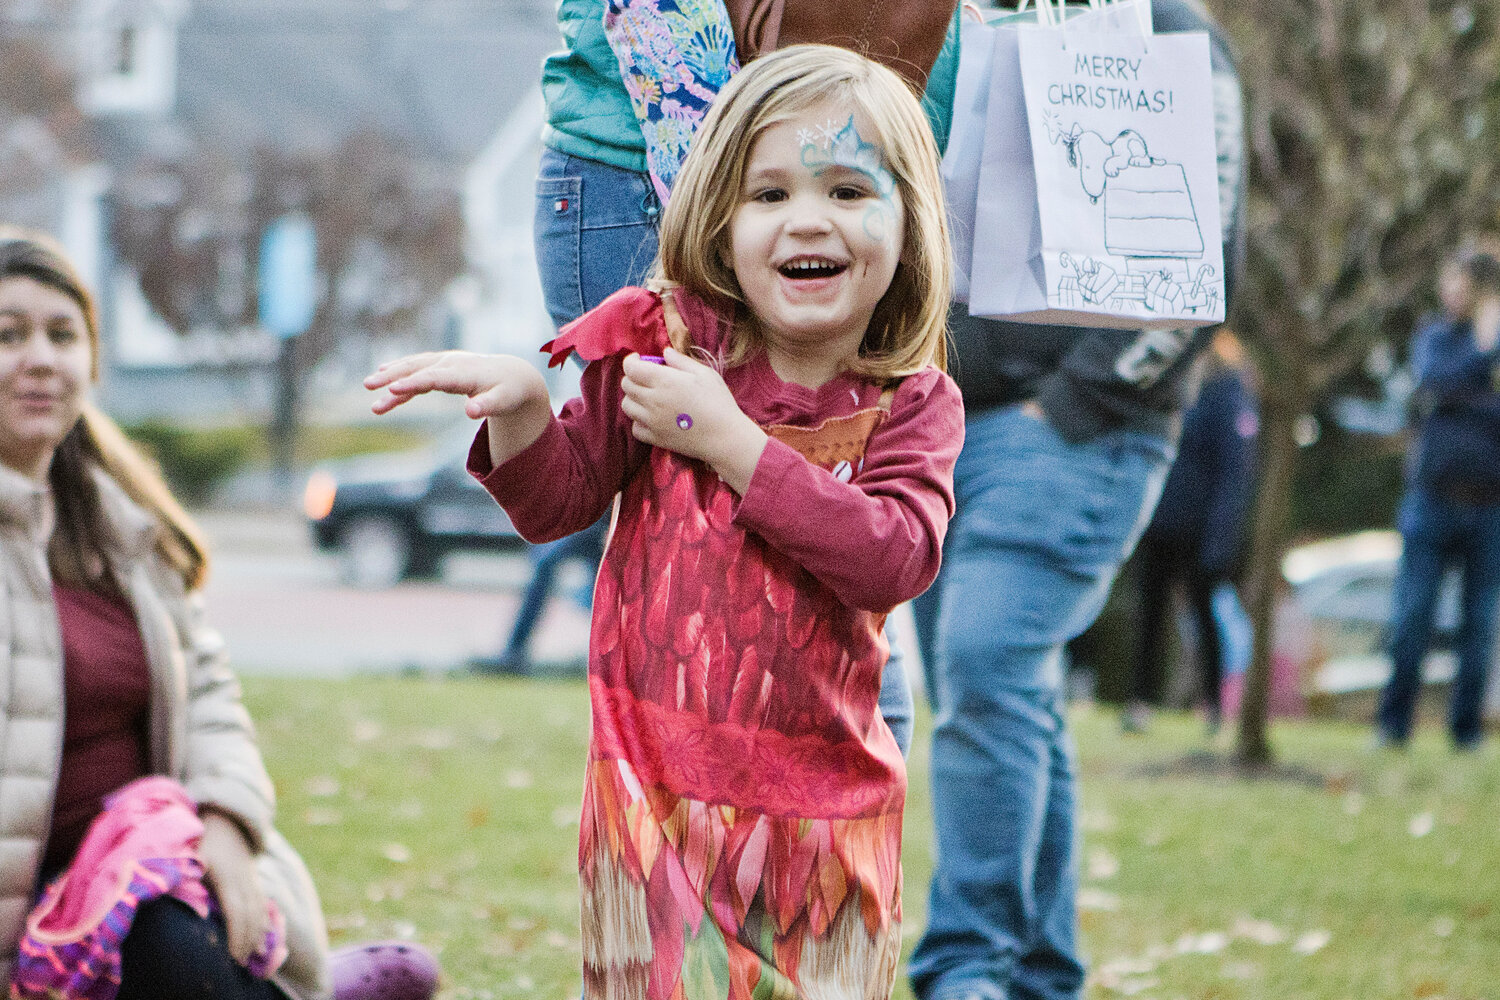 Rose Kennedy dances with excitement while waiting for Santa to arrive at the Barrington Town Hall, Saturday.